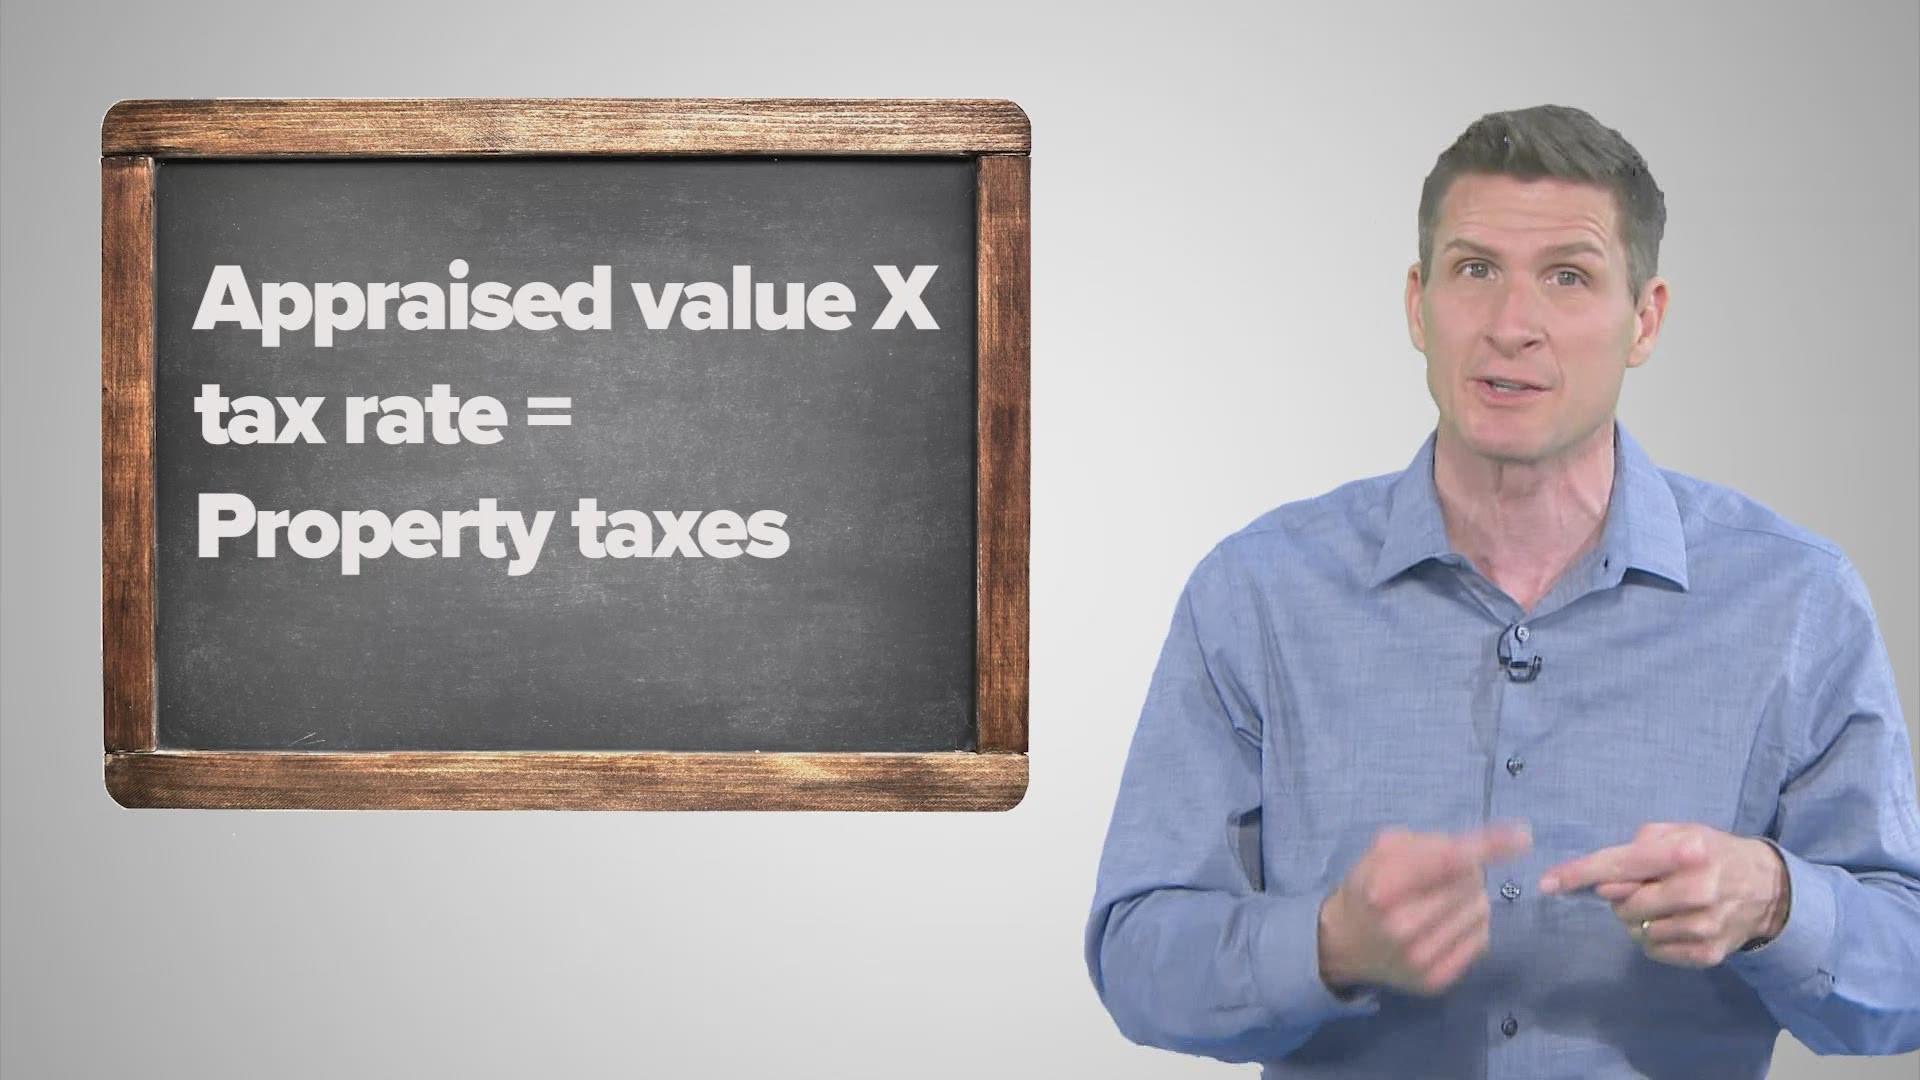 We sat down with a professional protestor, who shared some insight about how to fight the valuation that will be used to determine your property tax bill.